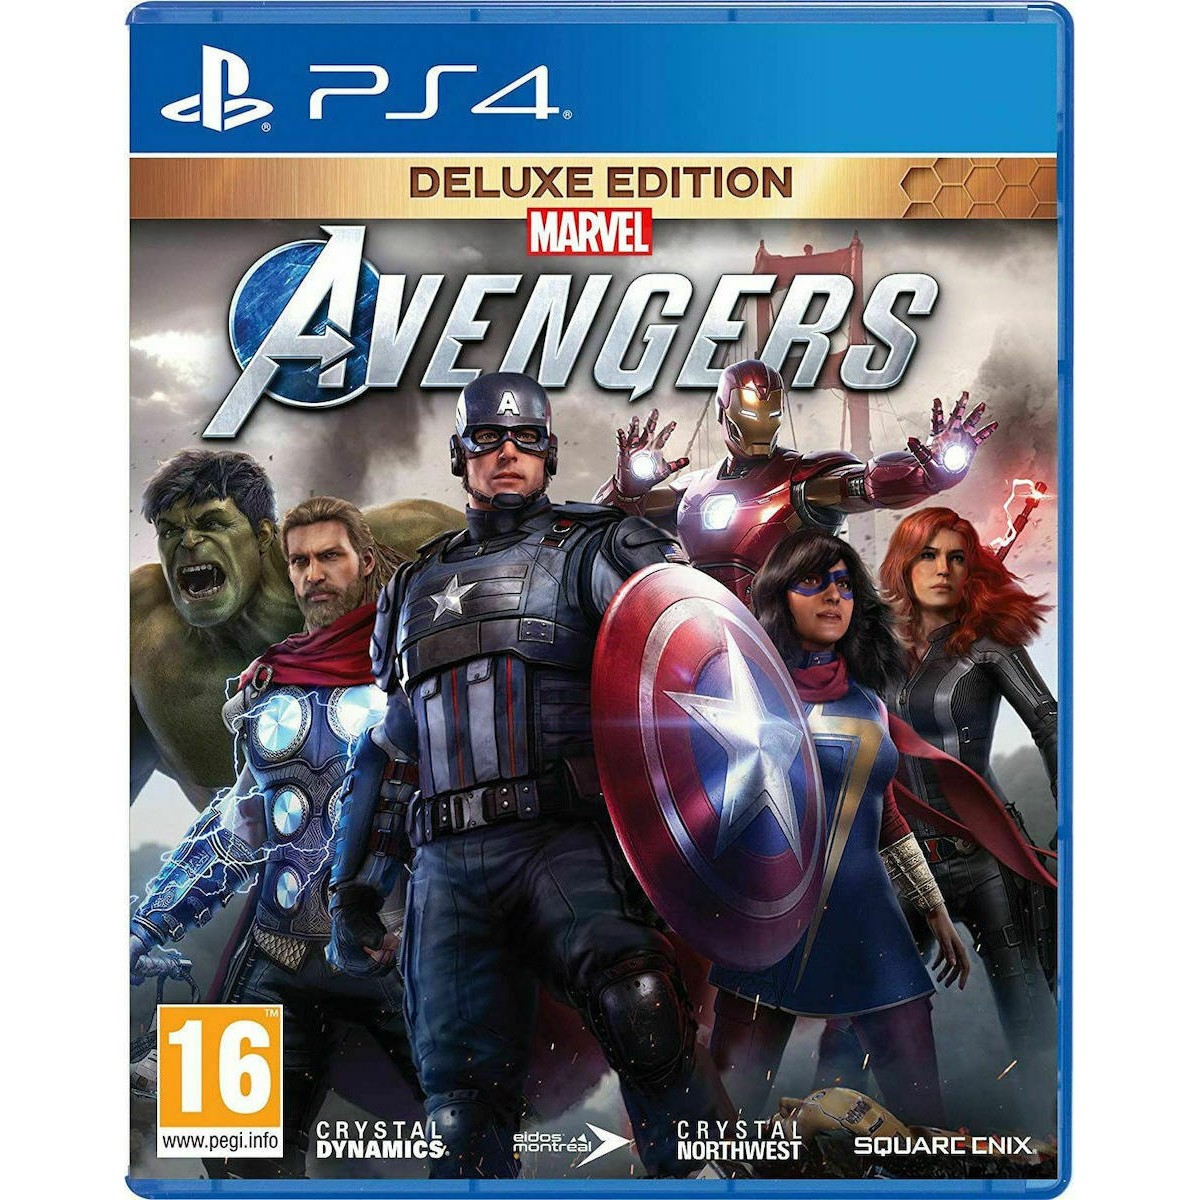 PS4 MARVEL'S AVENGERS DELUXE EDITION GAME